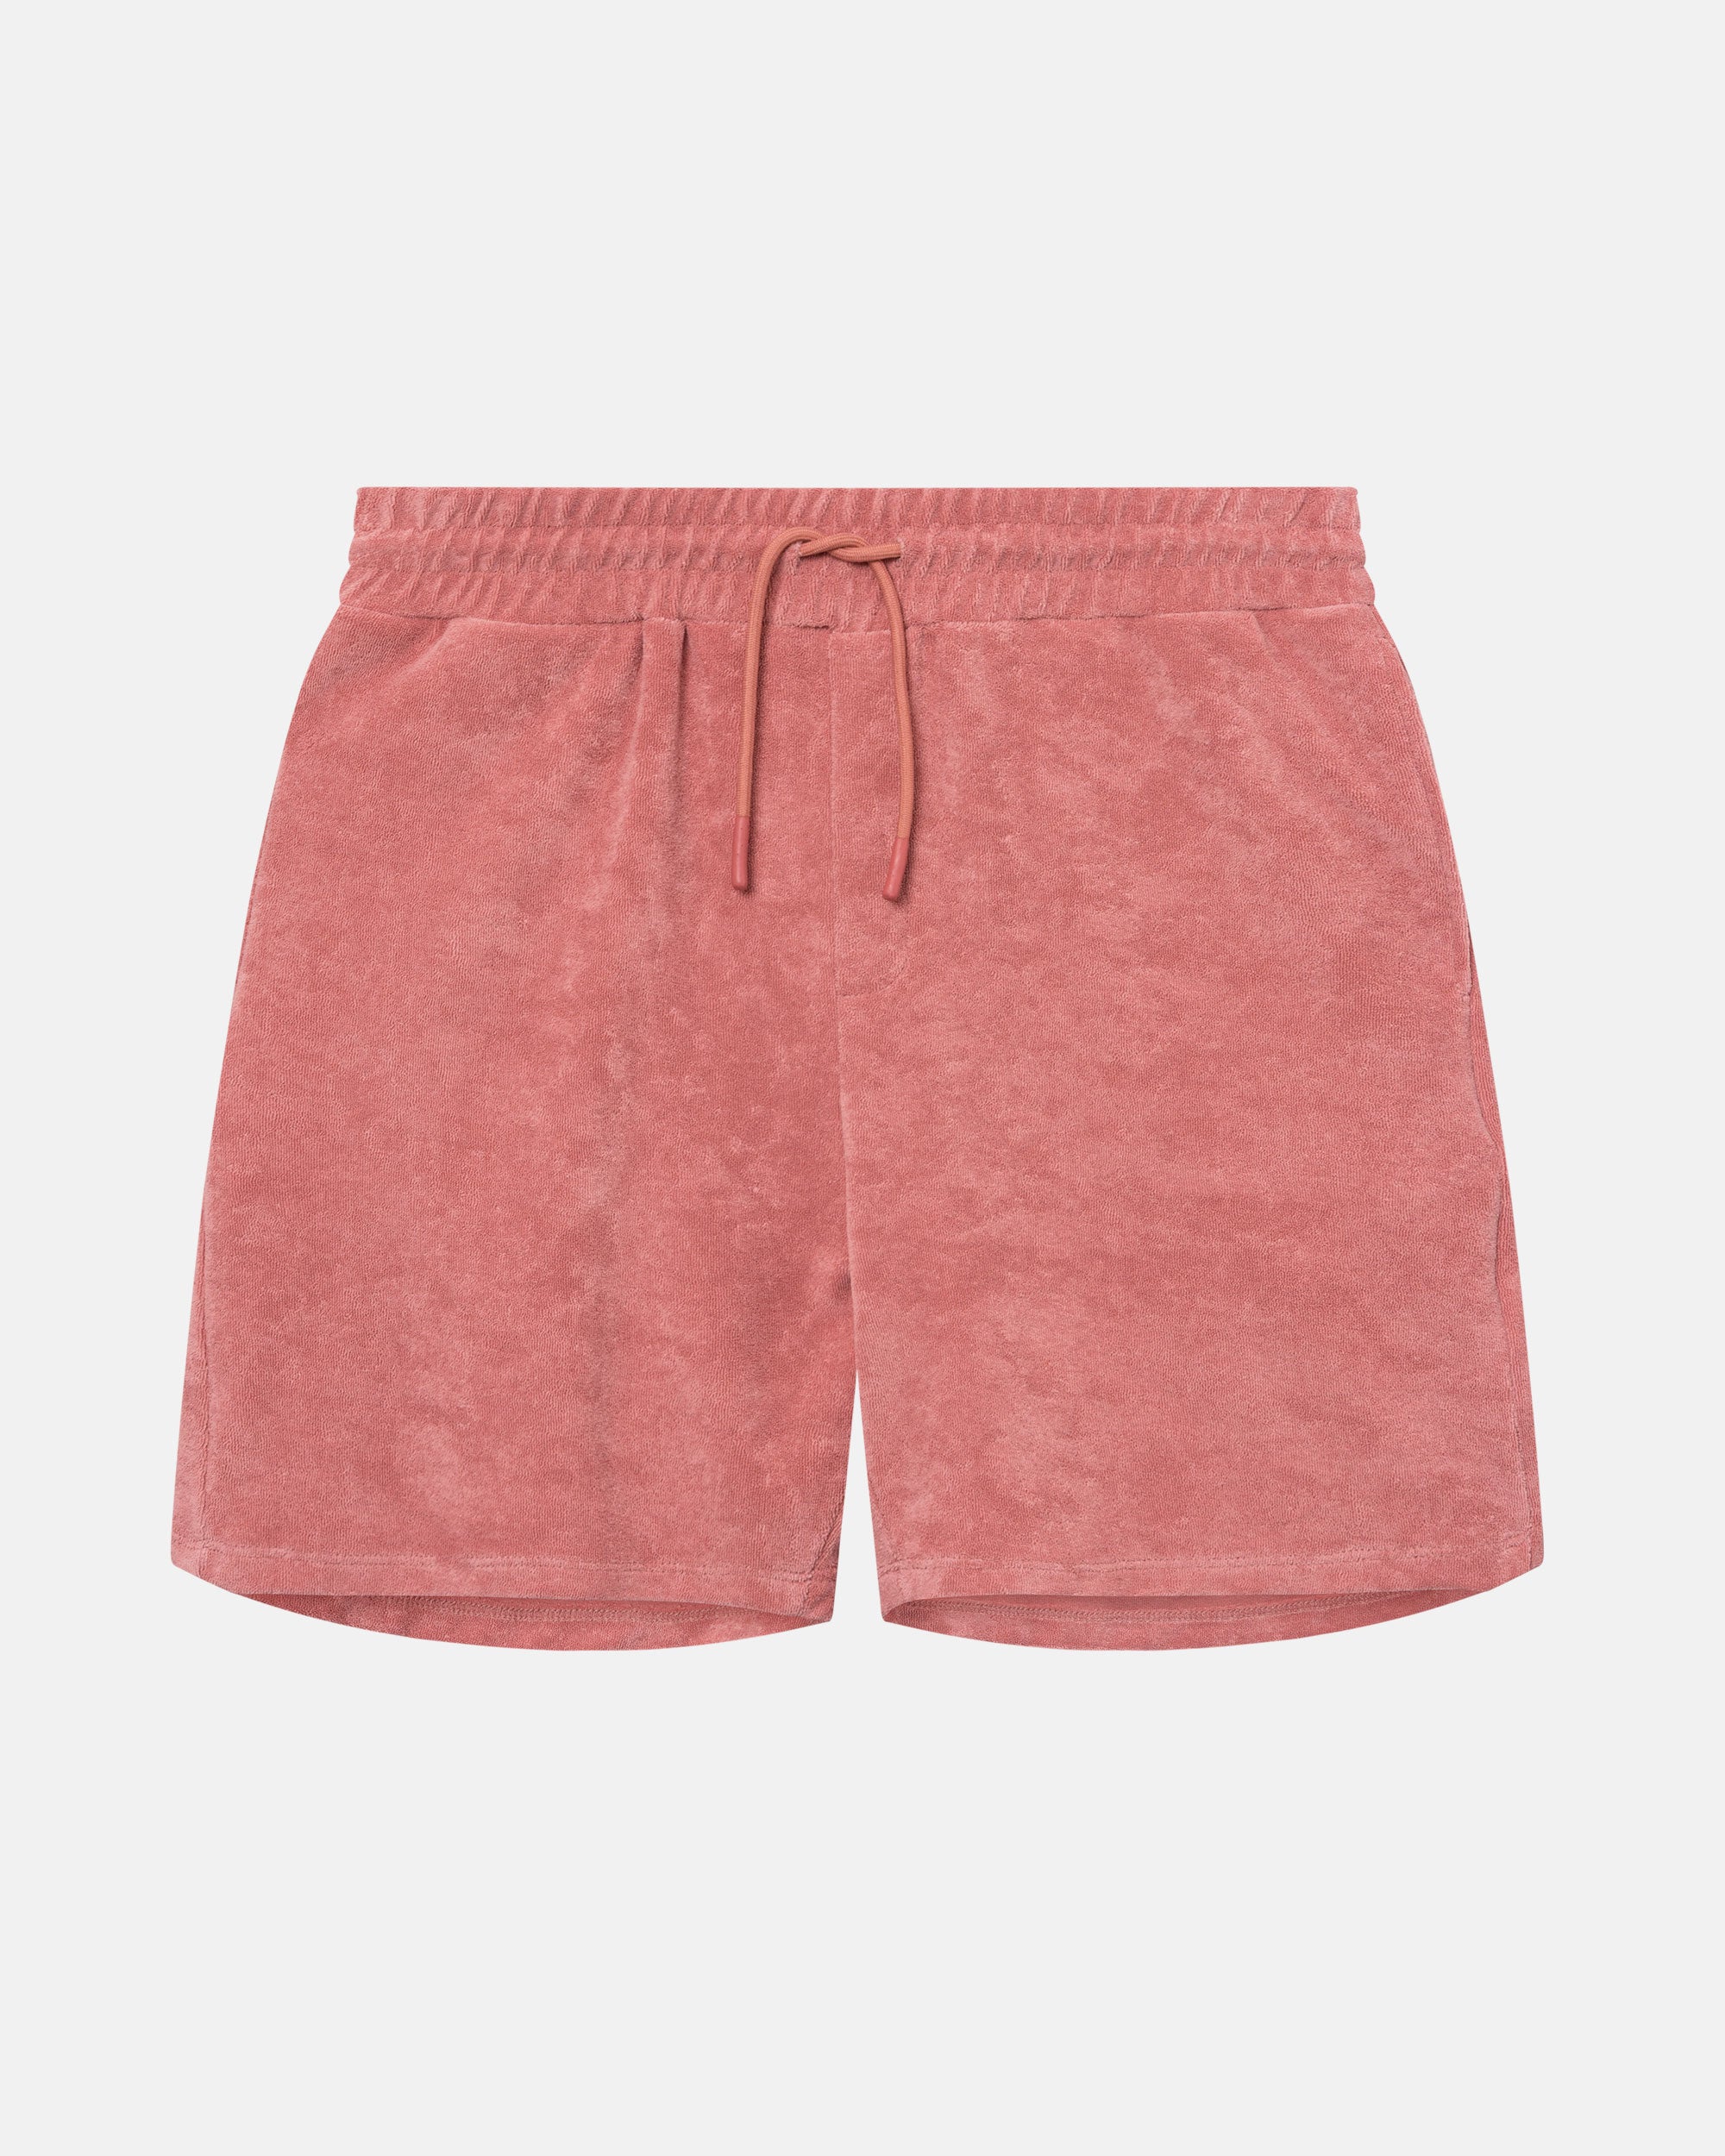 Terracotta colored mid length shorts in terry toweling fabric with drawdtring and two side pockets.